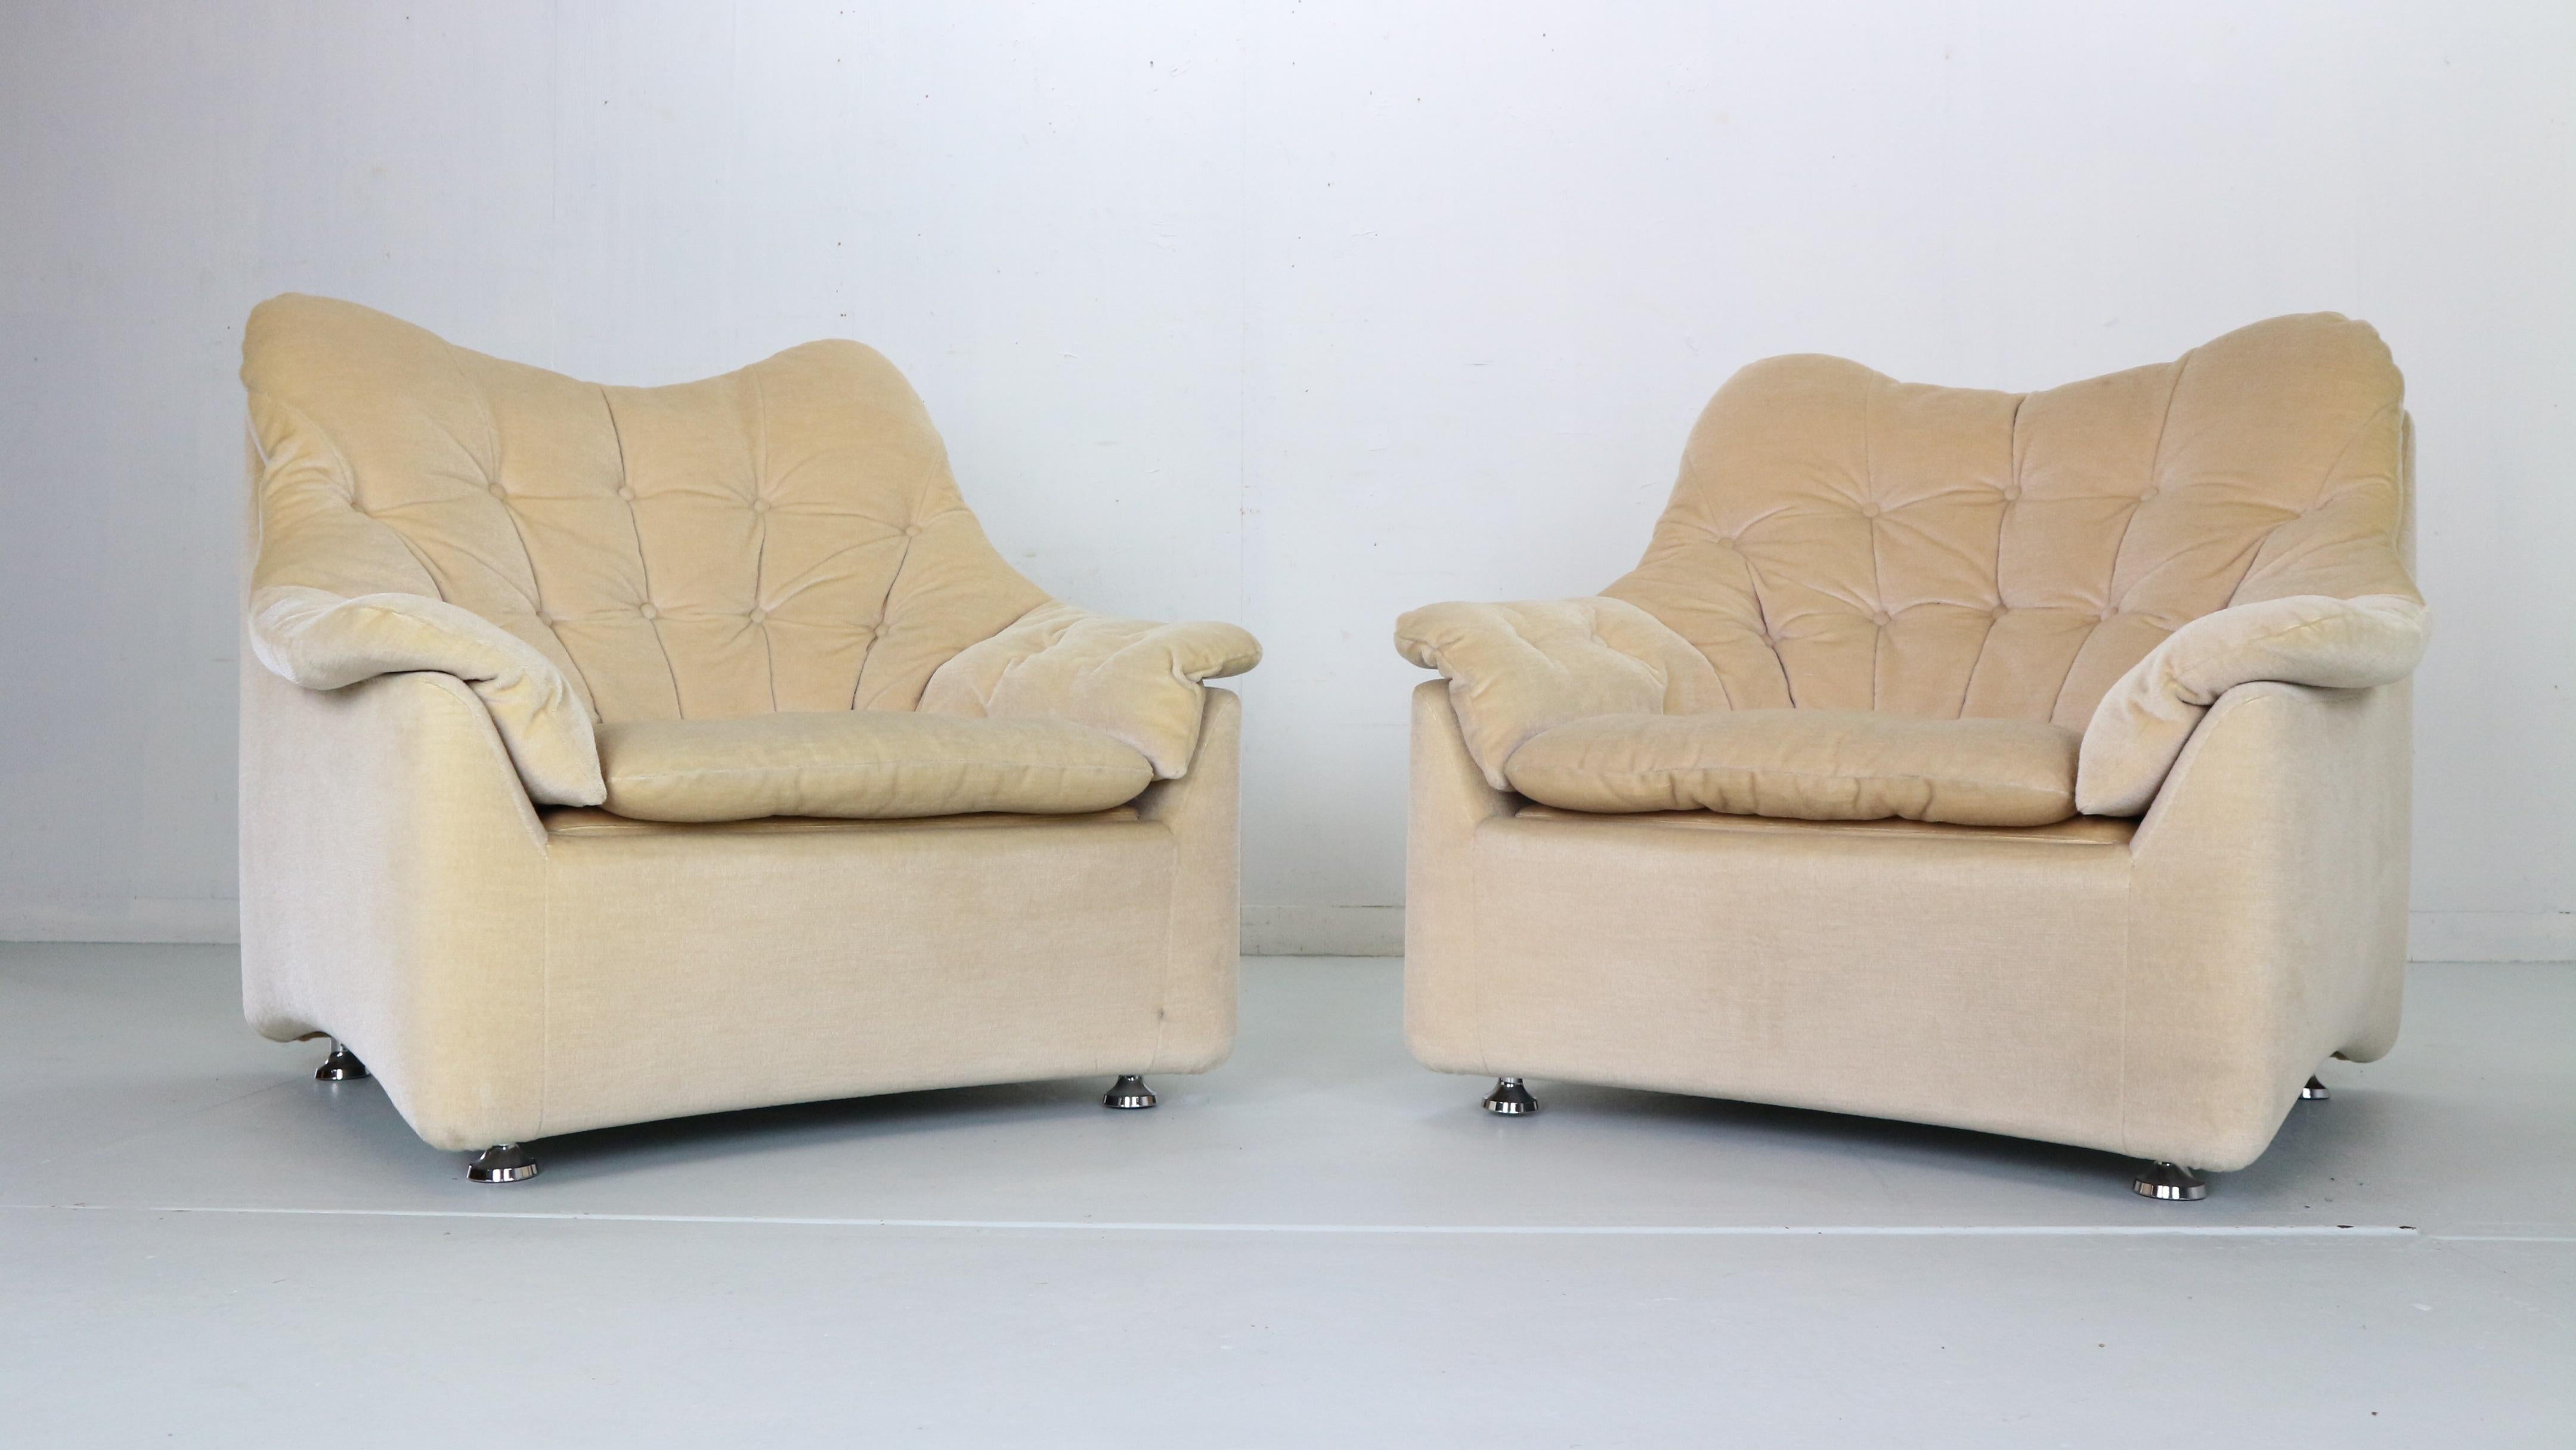 Set of two lounge chairs made in 1950's period, Germany. The chairs are made of mohair fabric. Off white into beige tone colour. A little rounded with high back rests and white seating chairs are very soft and comfortable. In very good condition.